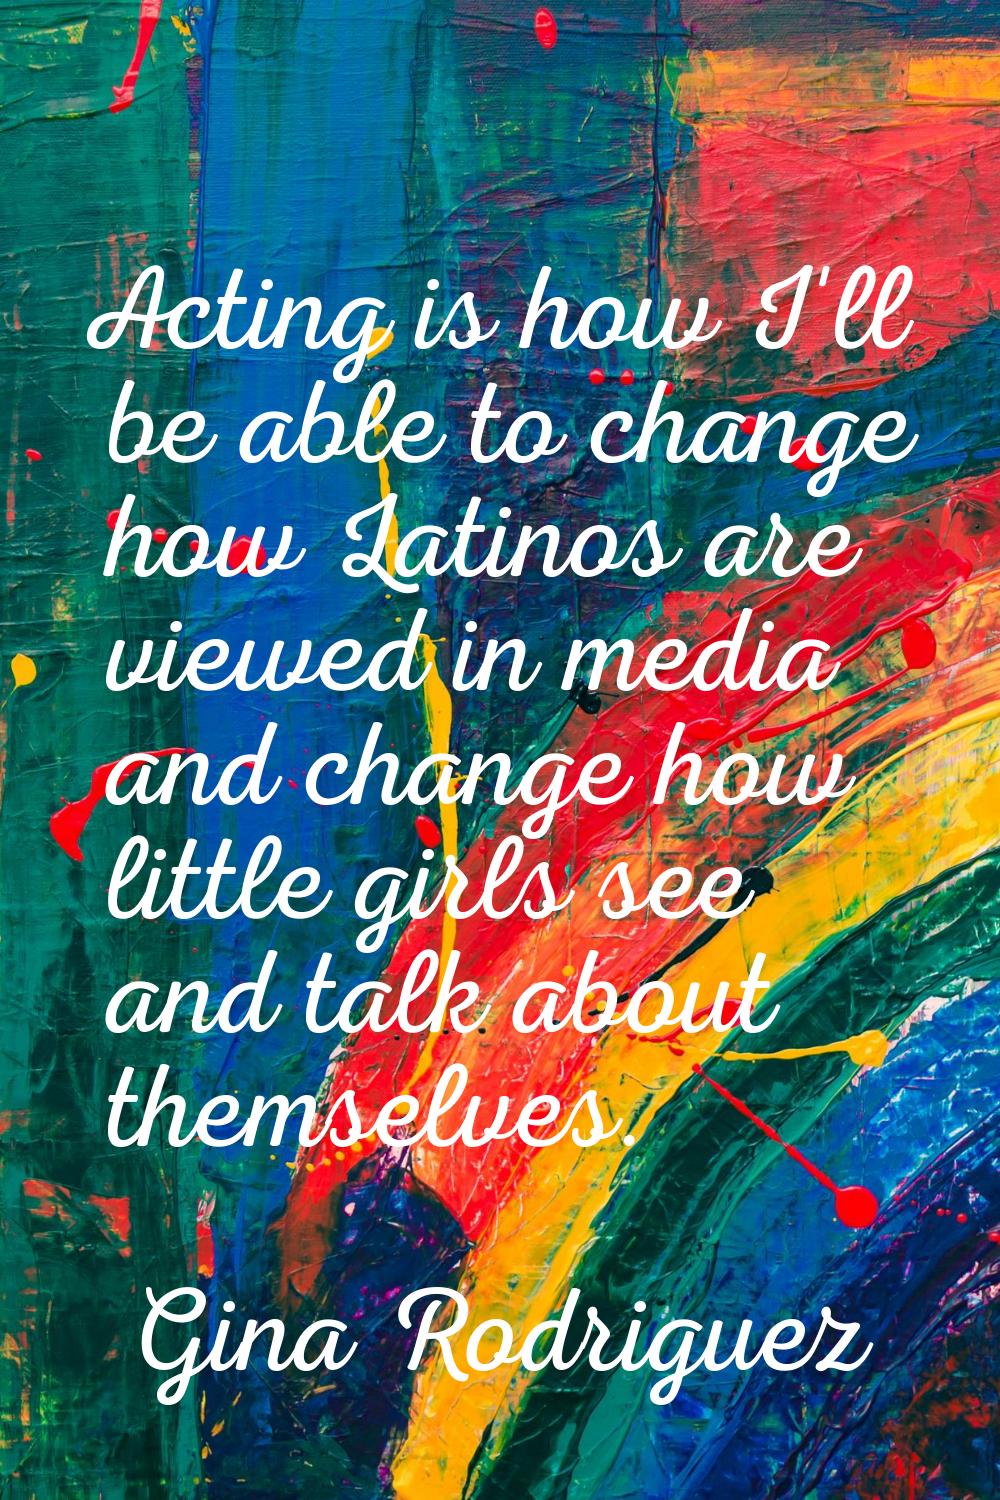 Acting is how I'll be able to change how Latinos are viewed in media and change how little girls se